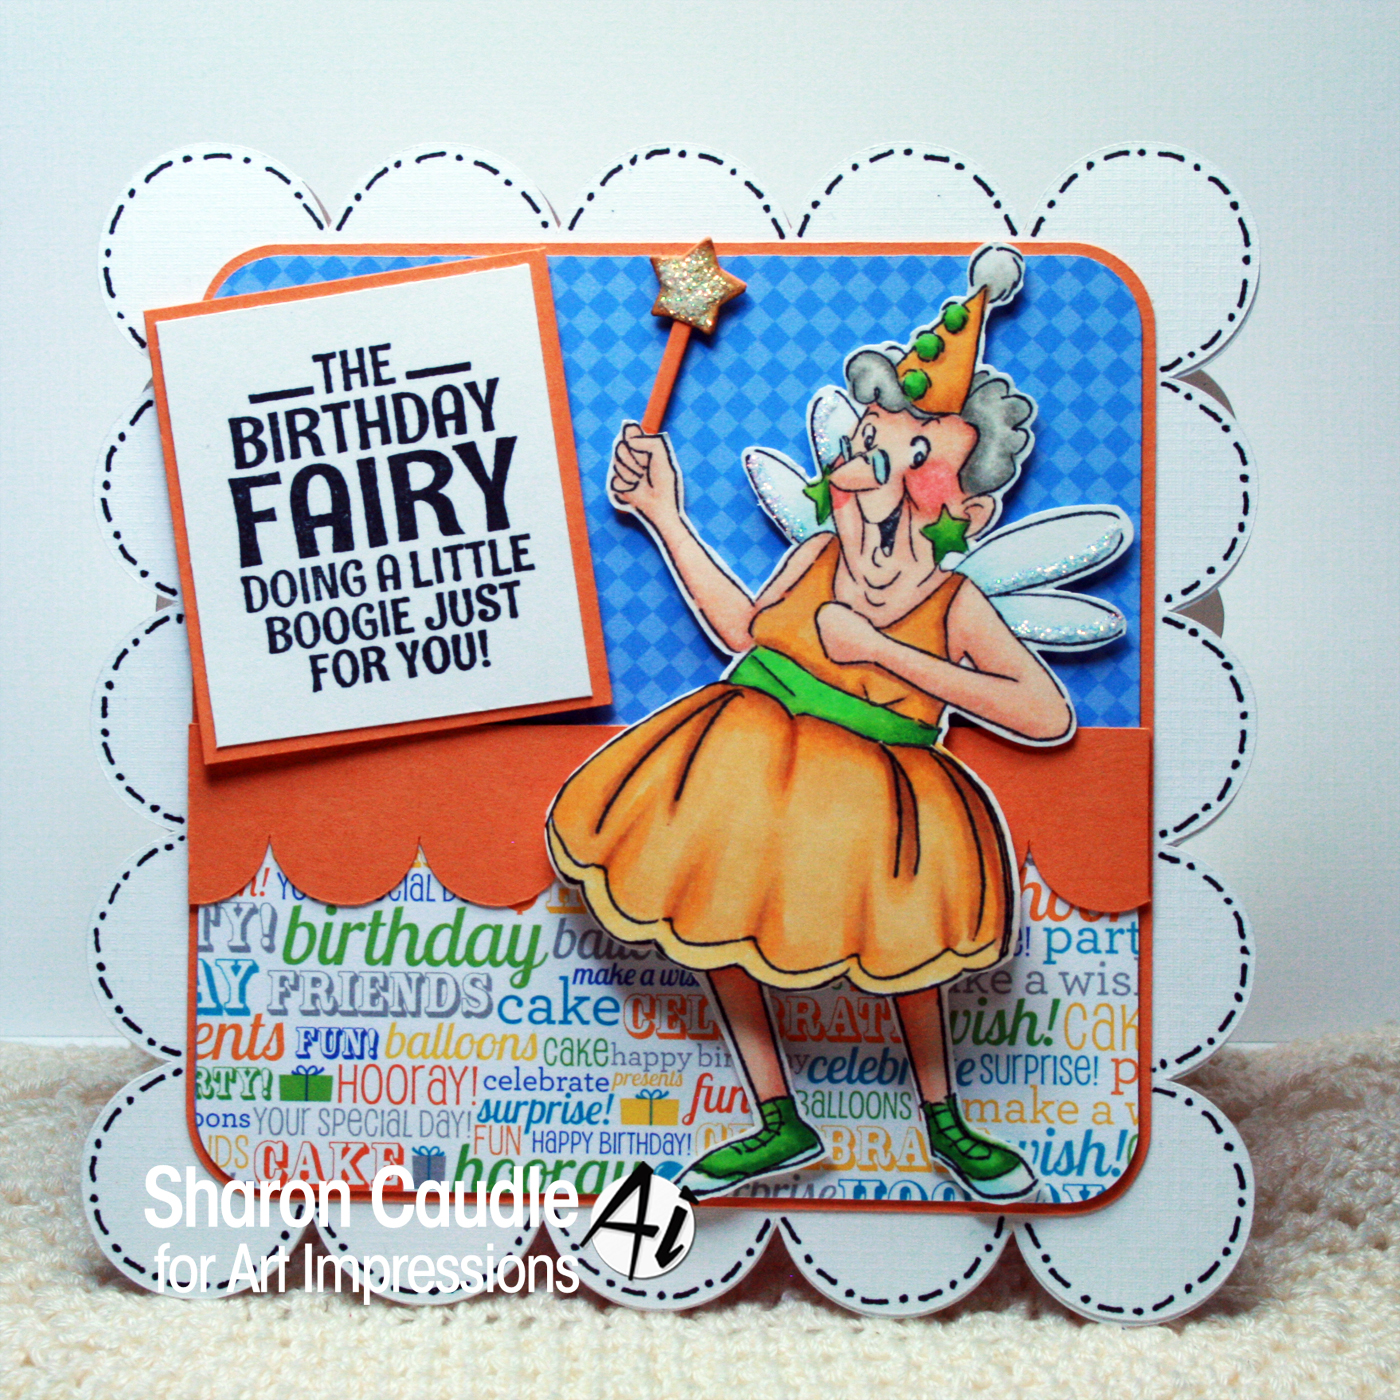 gramma-s-house-of-cards-art-impressions-birthday-fairy-is-ready-to-boogie